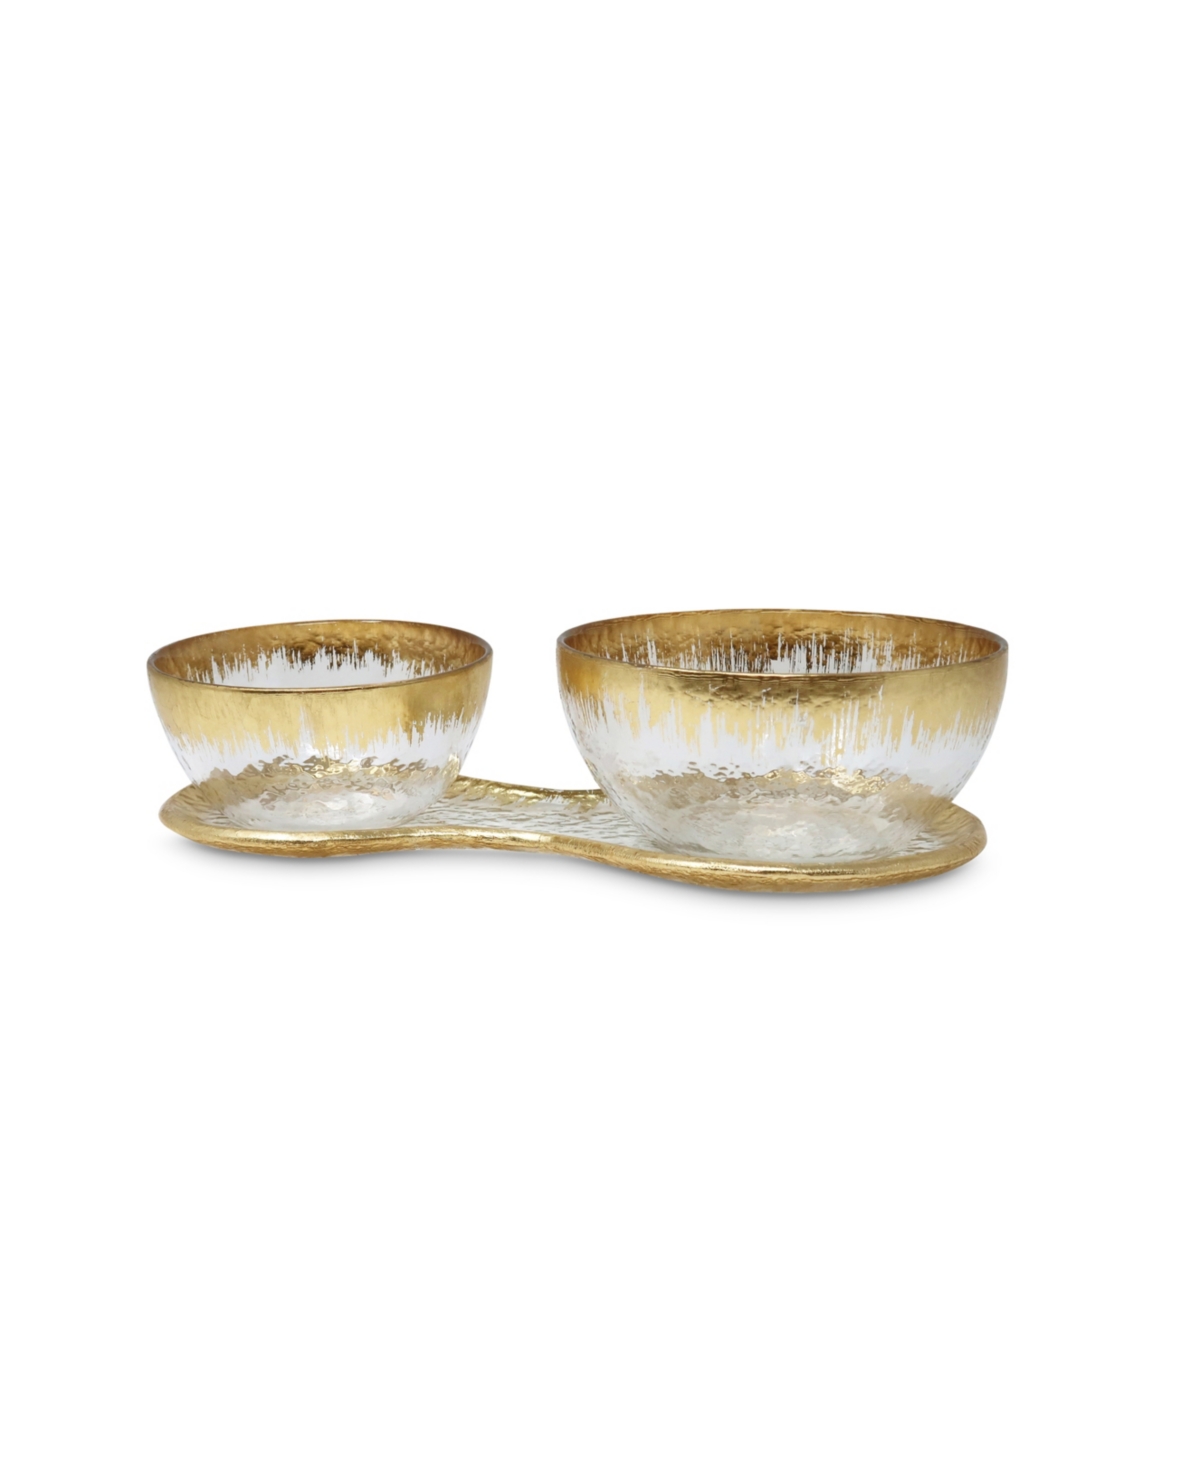 2 Bowl Relish Dish on Tray with Gold-Tone Design, 3 Piece Set - Gold